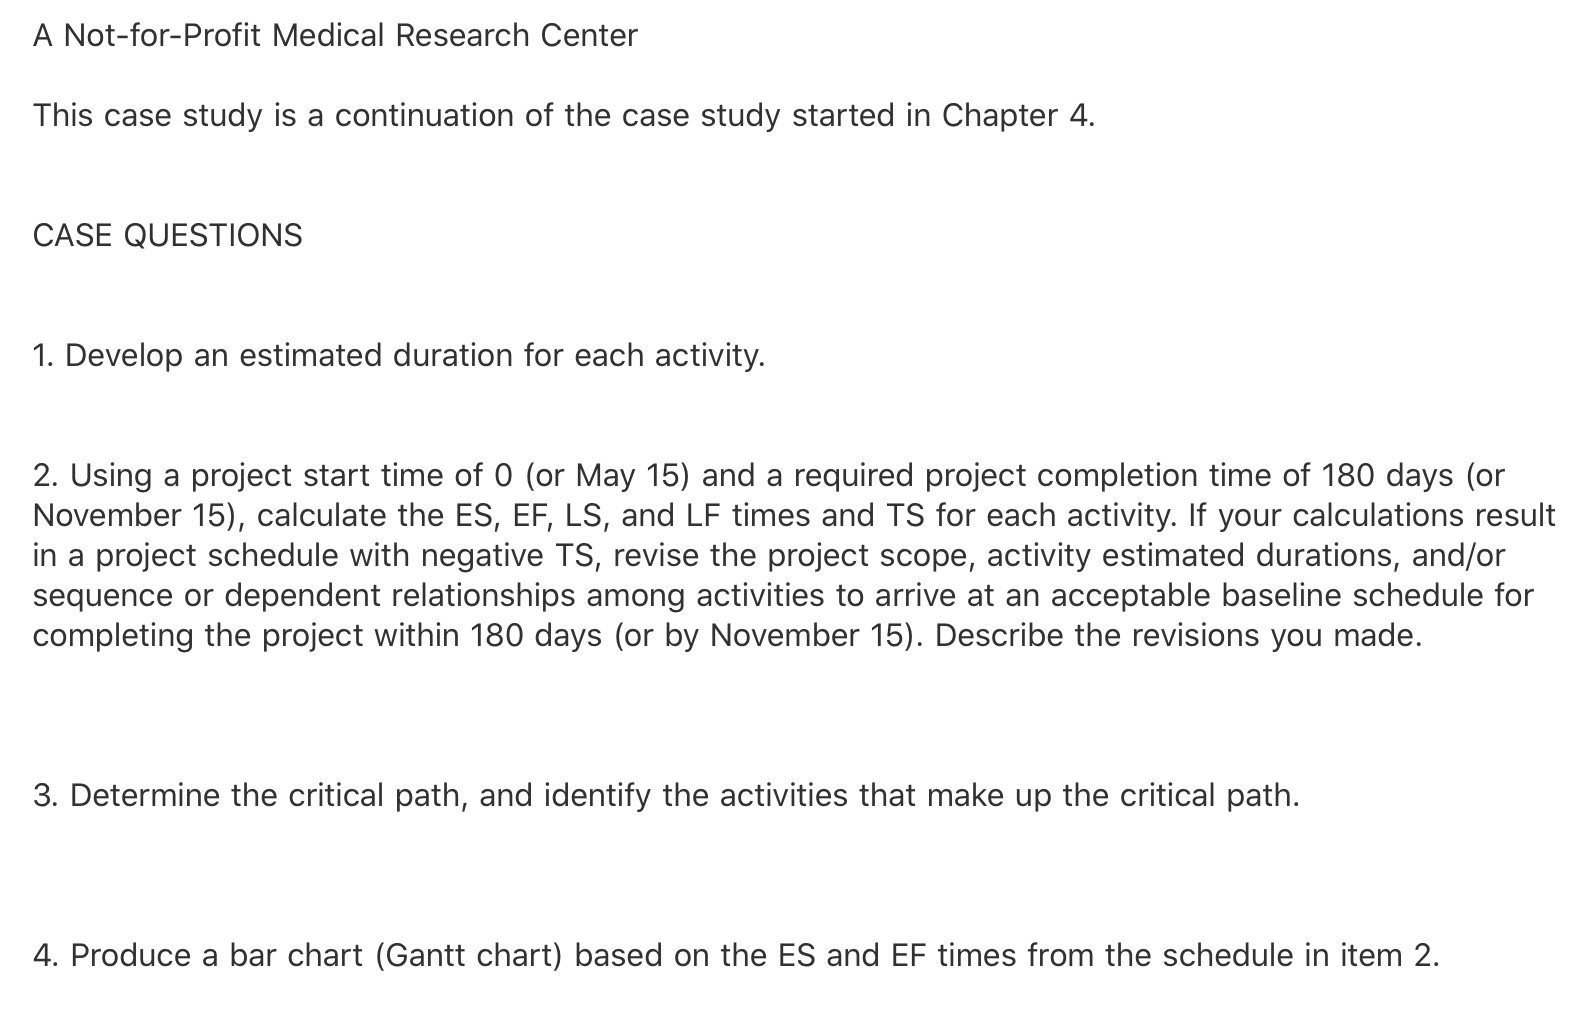 case study 1 a not for profit medical research center